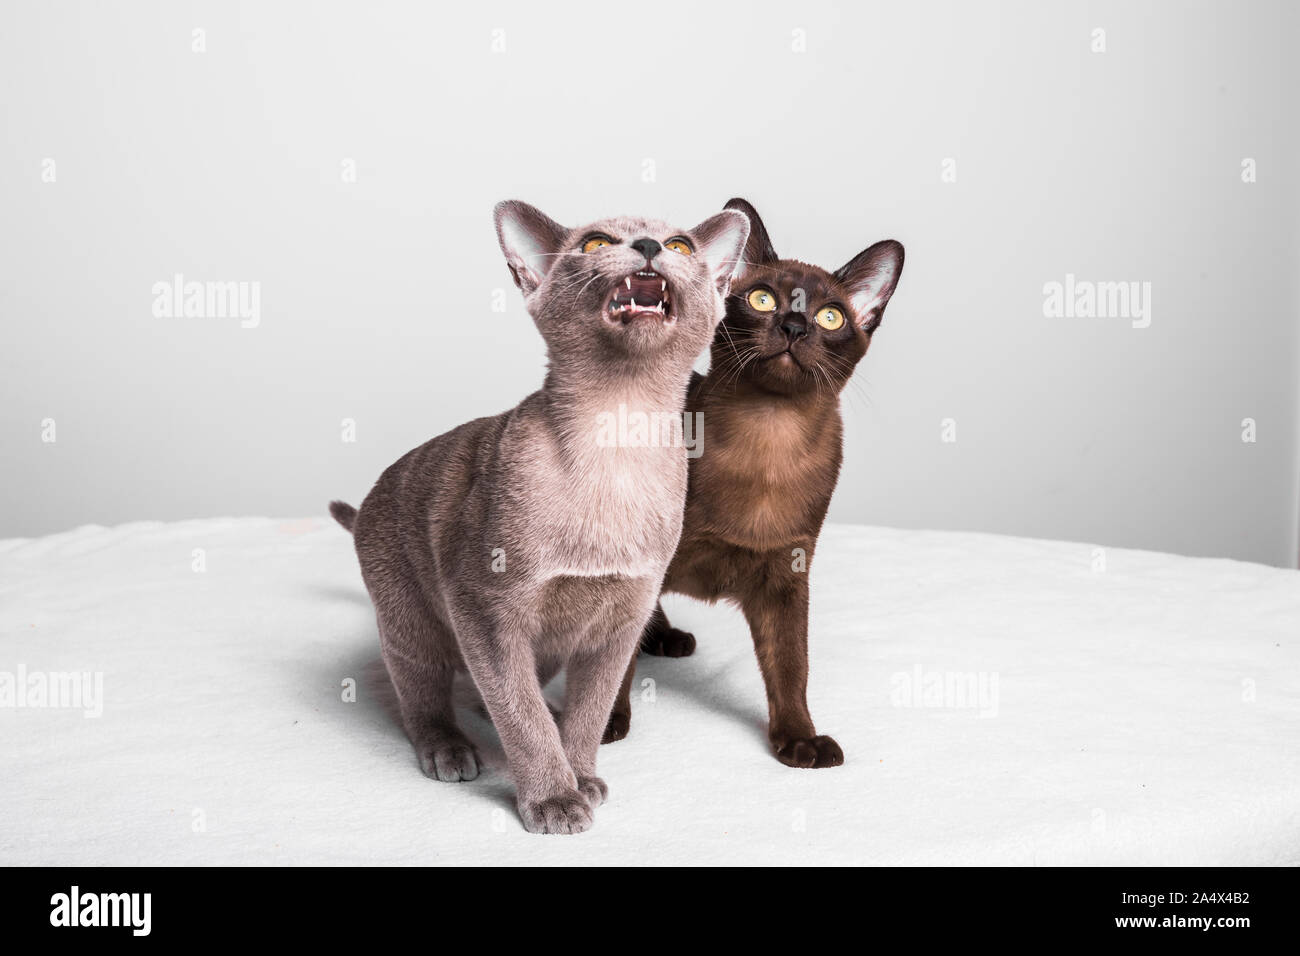 Two burmese kittens looking up. The cats are about 17 weeks old and they are sitting on a white blanket with a gray background. Stock Photo